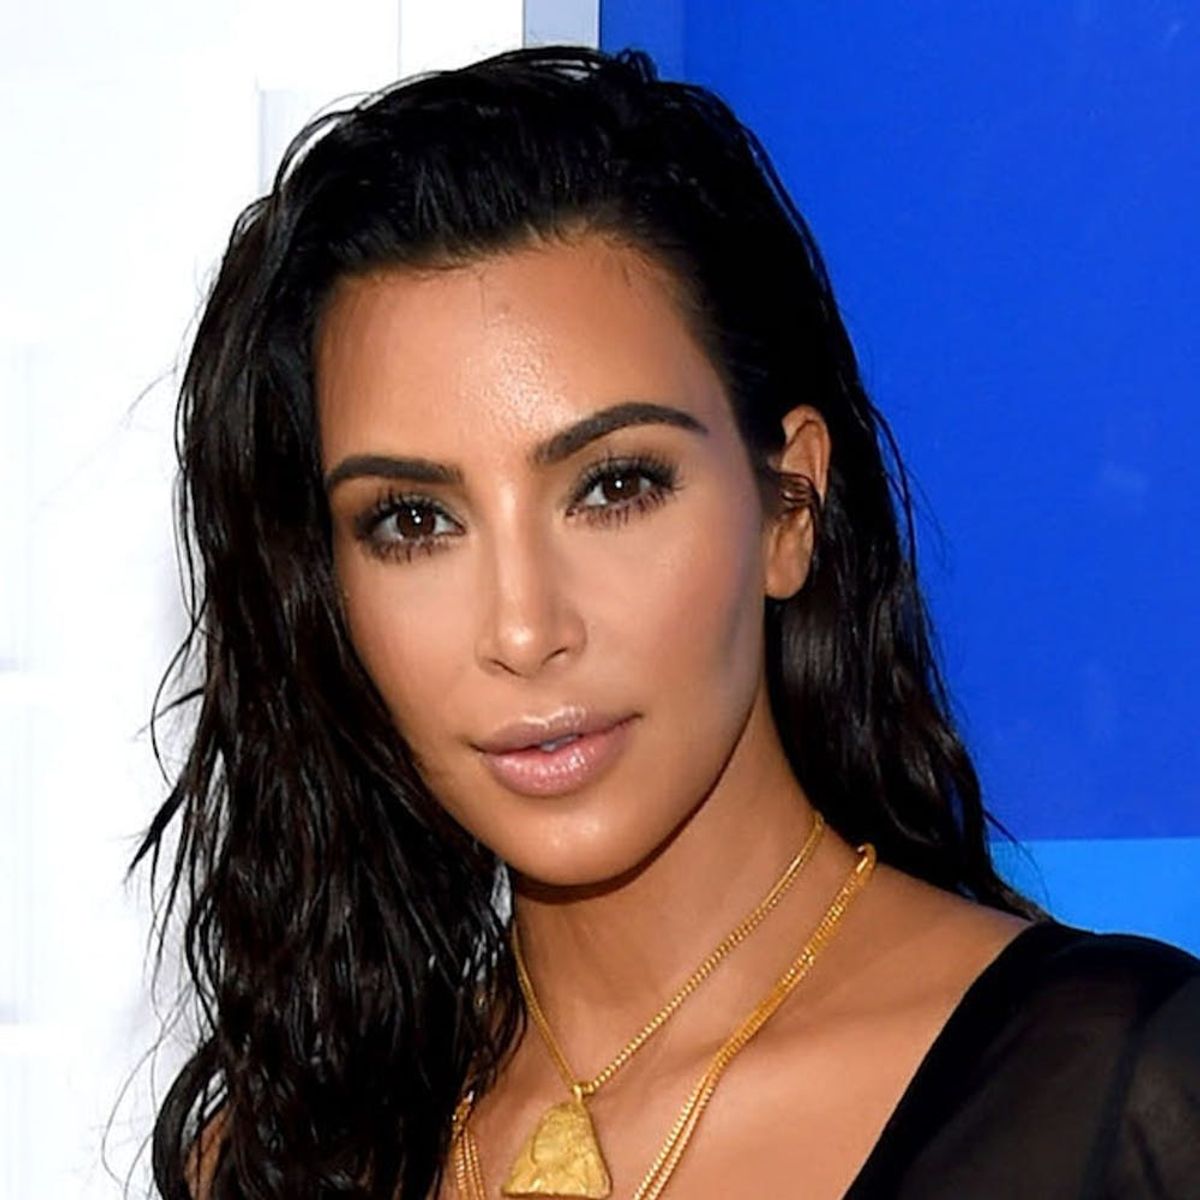 Morning Buzz! Kim Kardashian Disappears from Social Media Again But Plans Her First Appearance Since Robbery + More